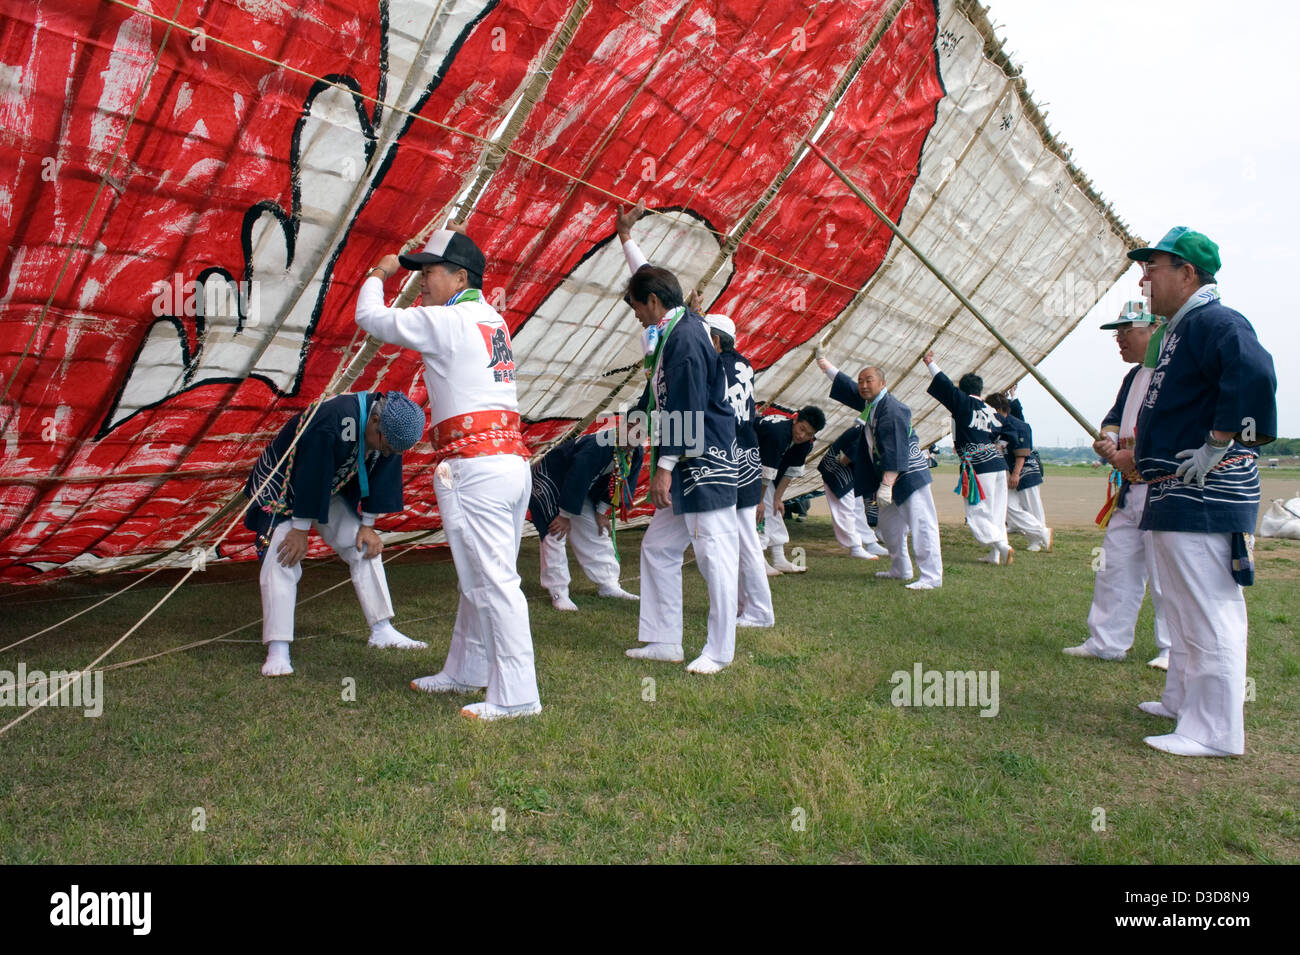 Team gets ready to launch giant paper and bamboo kite weighing 950 kilos and measuring 15 meters square at Sagami Kite Festival Stock Photo